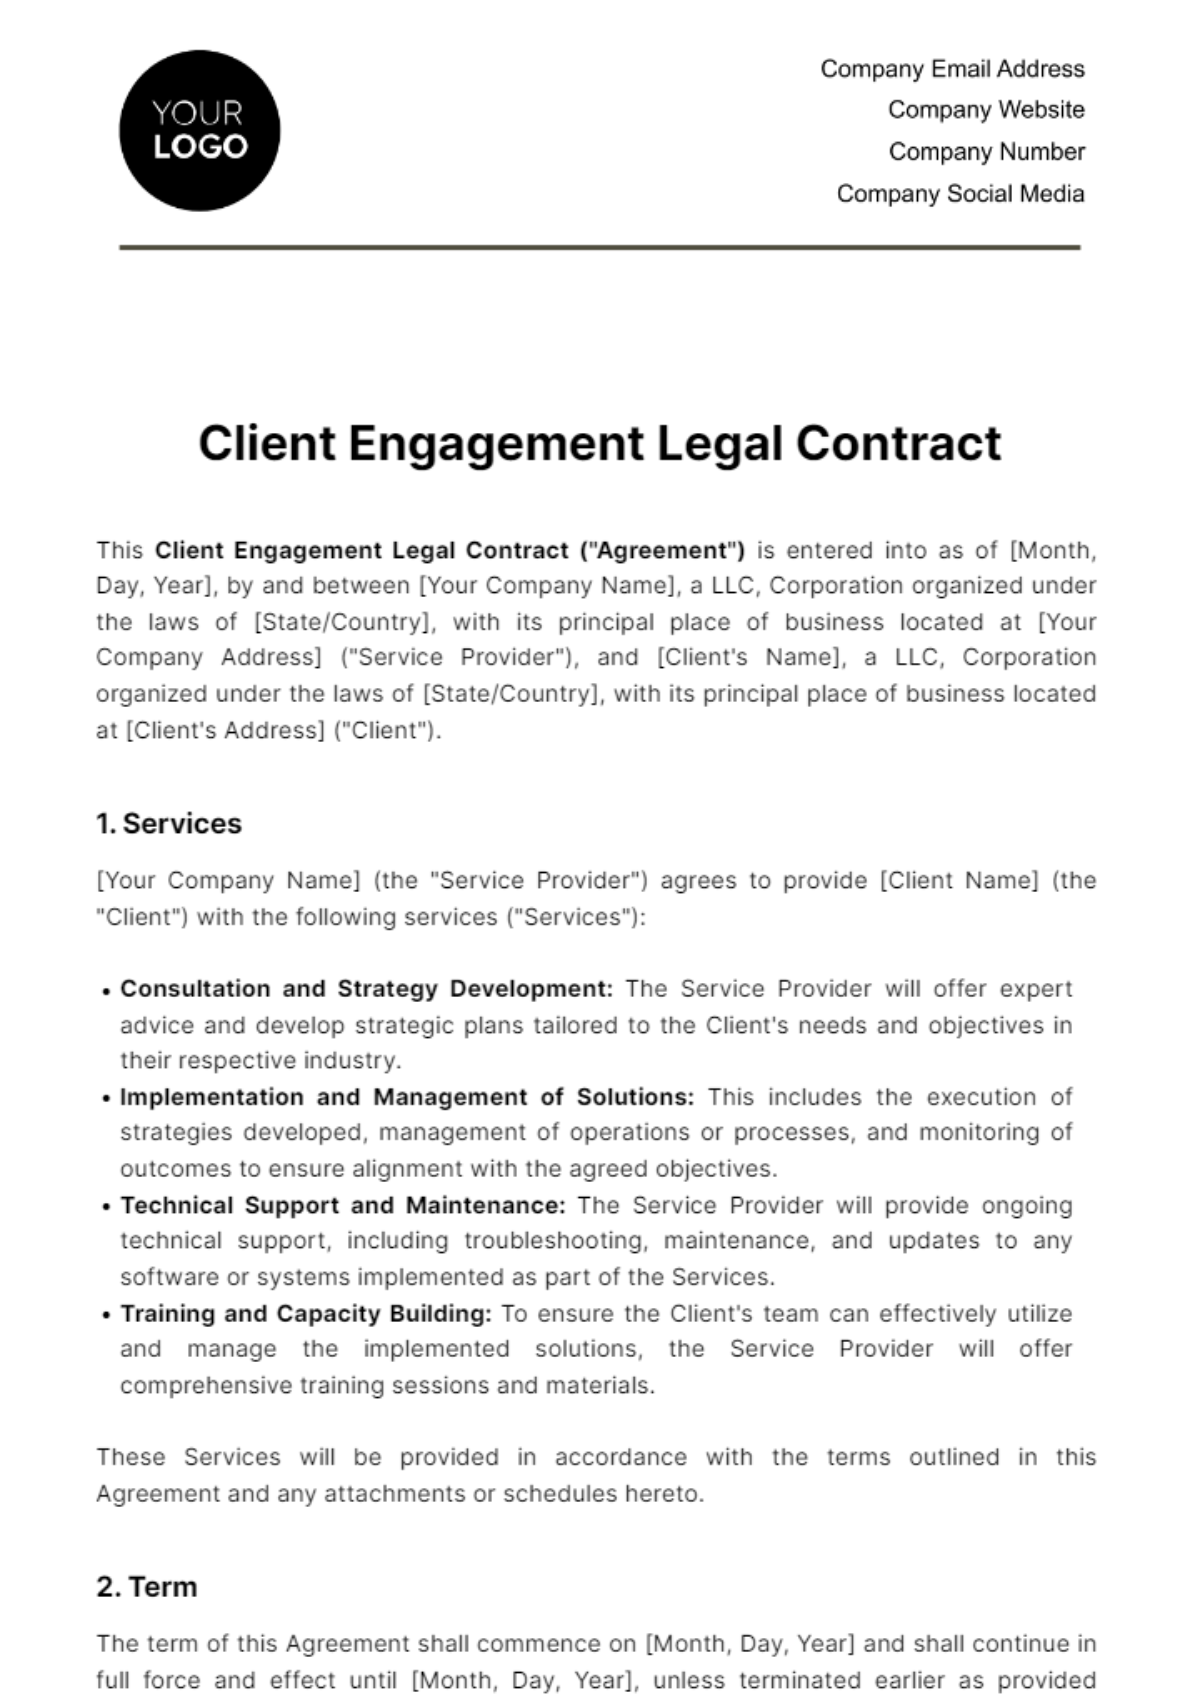 Client Engagement Legal Contract Template